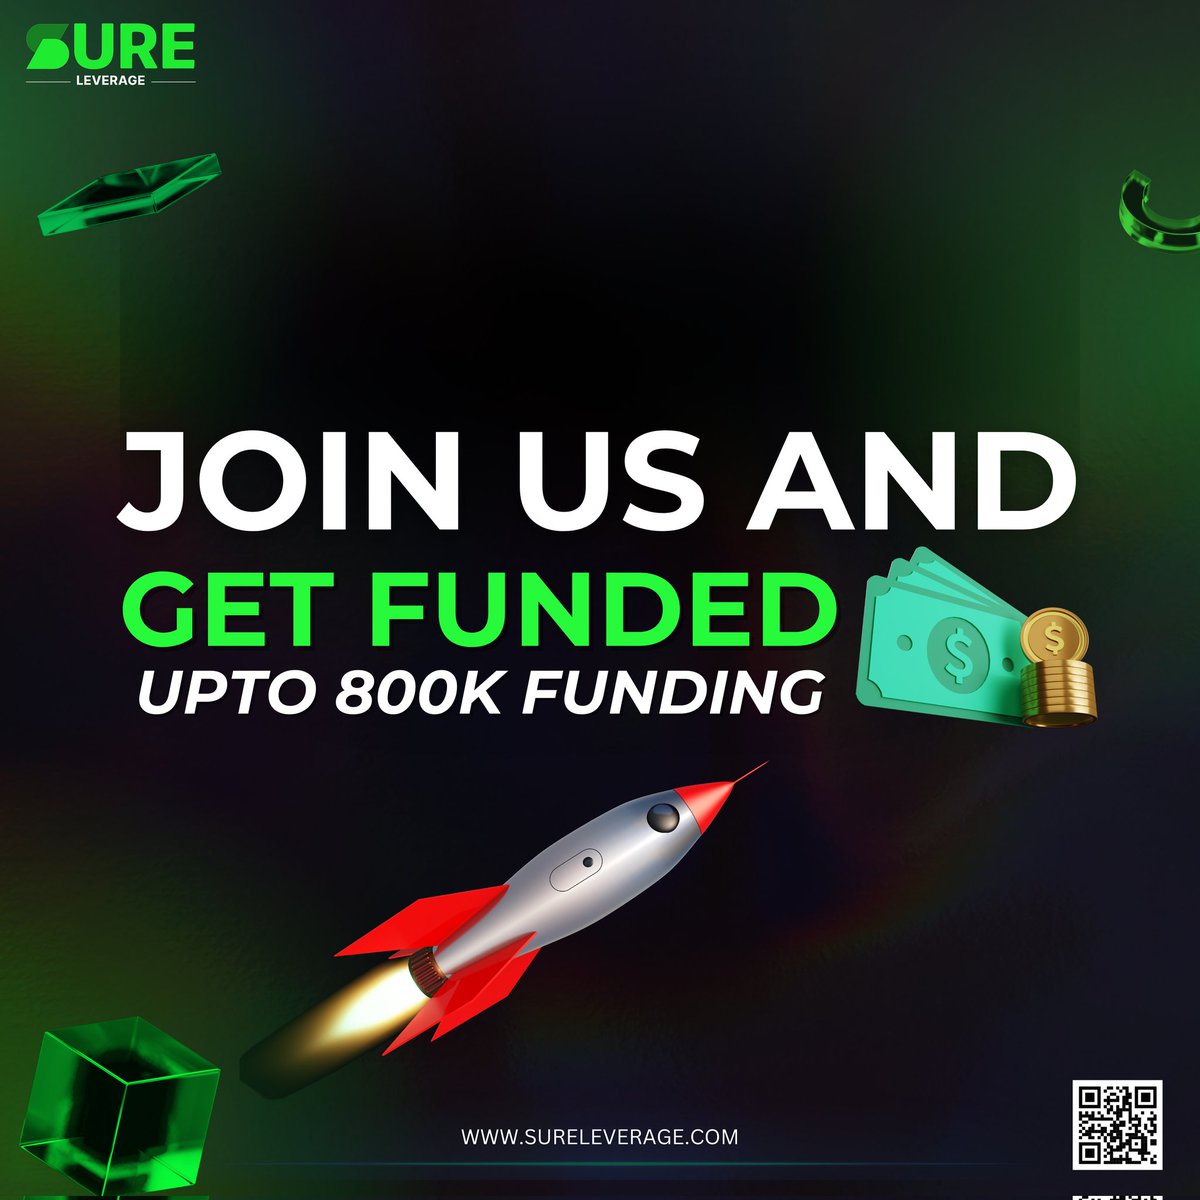 LOOKING FOR FUNDS?

💸JOIN US AND GET FUNDED UPTO 800K FUNDING

🚀 Sign up and get 20% off + 125% refund
📌CODE Refund125

💪 For more information visit 
SureLeverage.com

#trading #smc #propfirmtrader    #offer  #makemoneyonlinenow #sureleverage #earnonline #growyourown